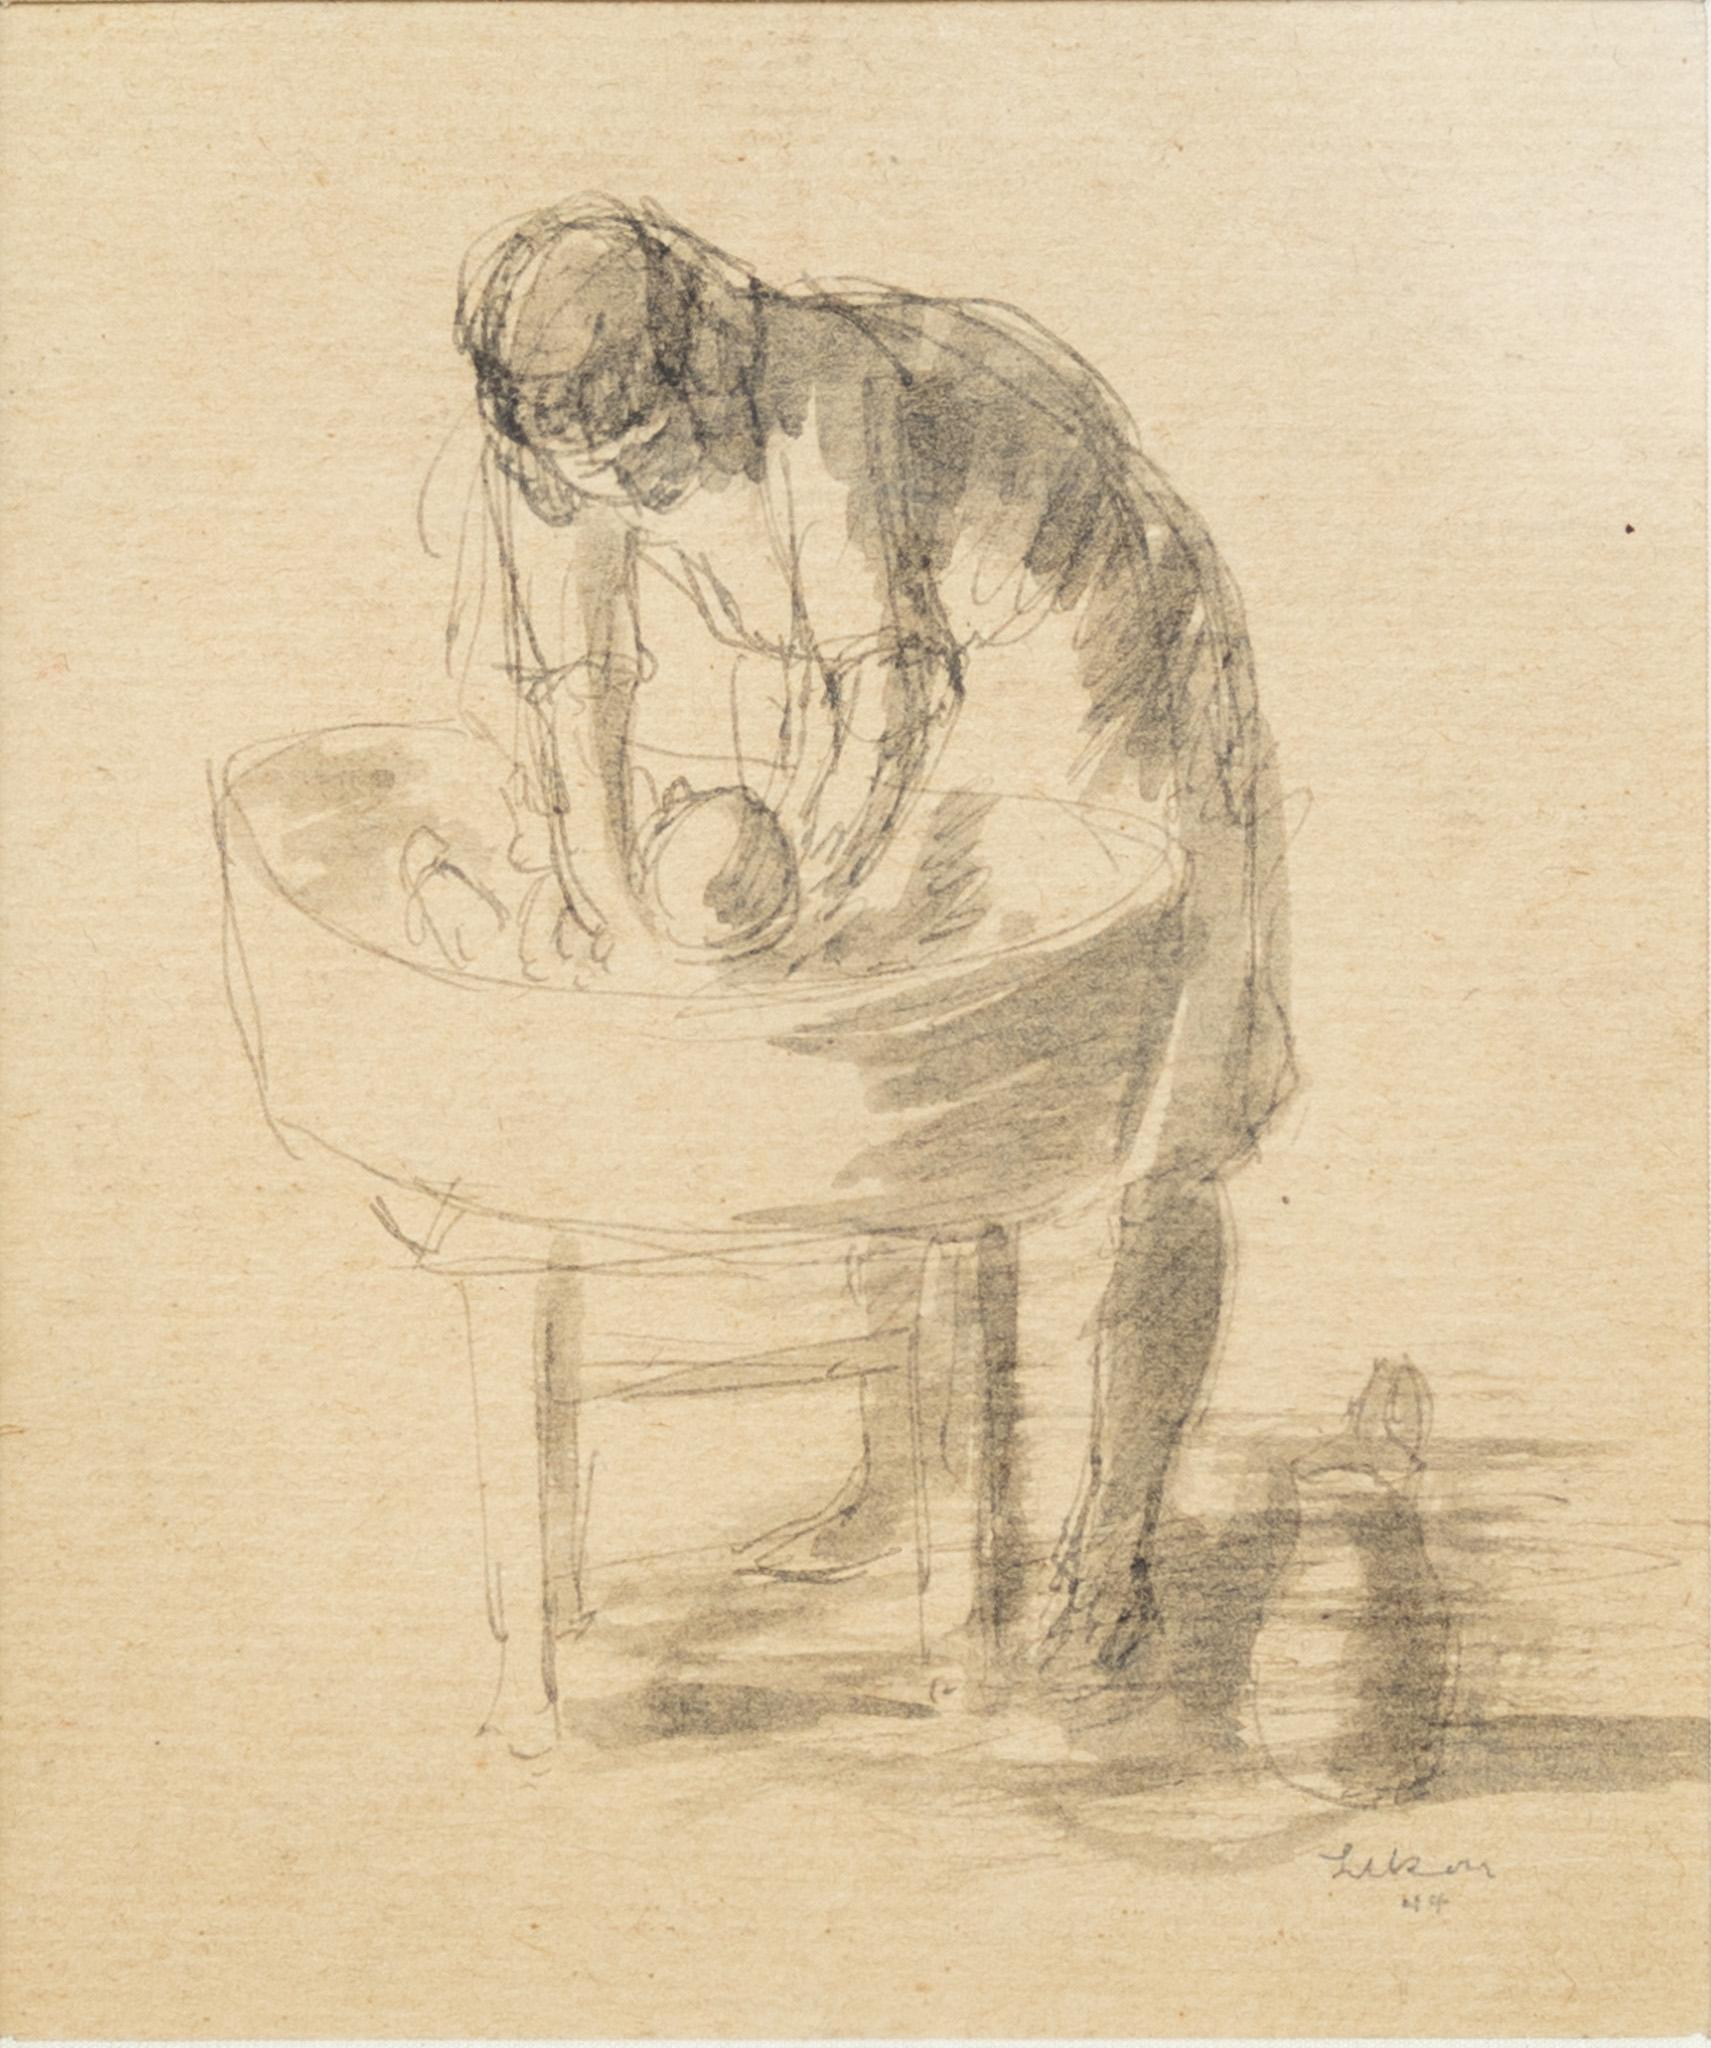 Mother and Child in Cradle Sketch - Art by Gustav Likan